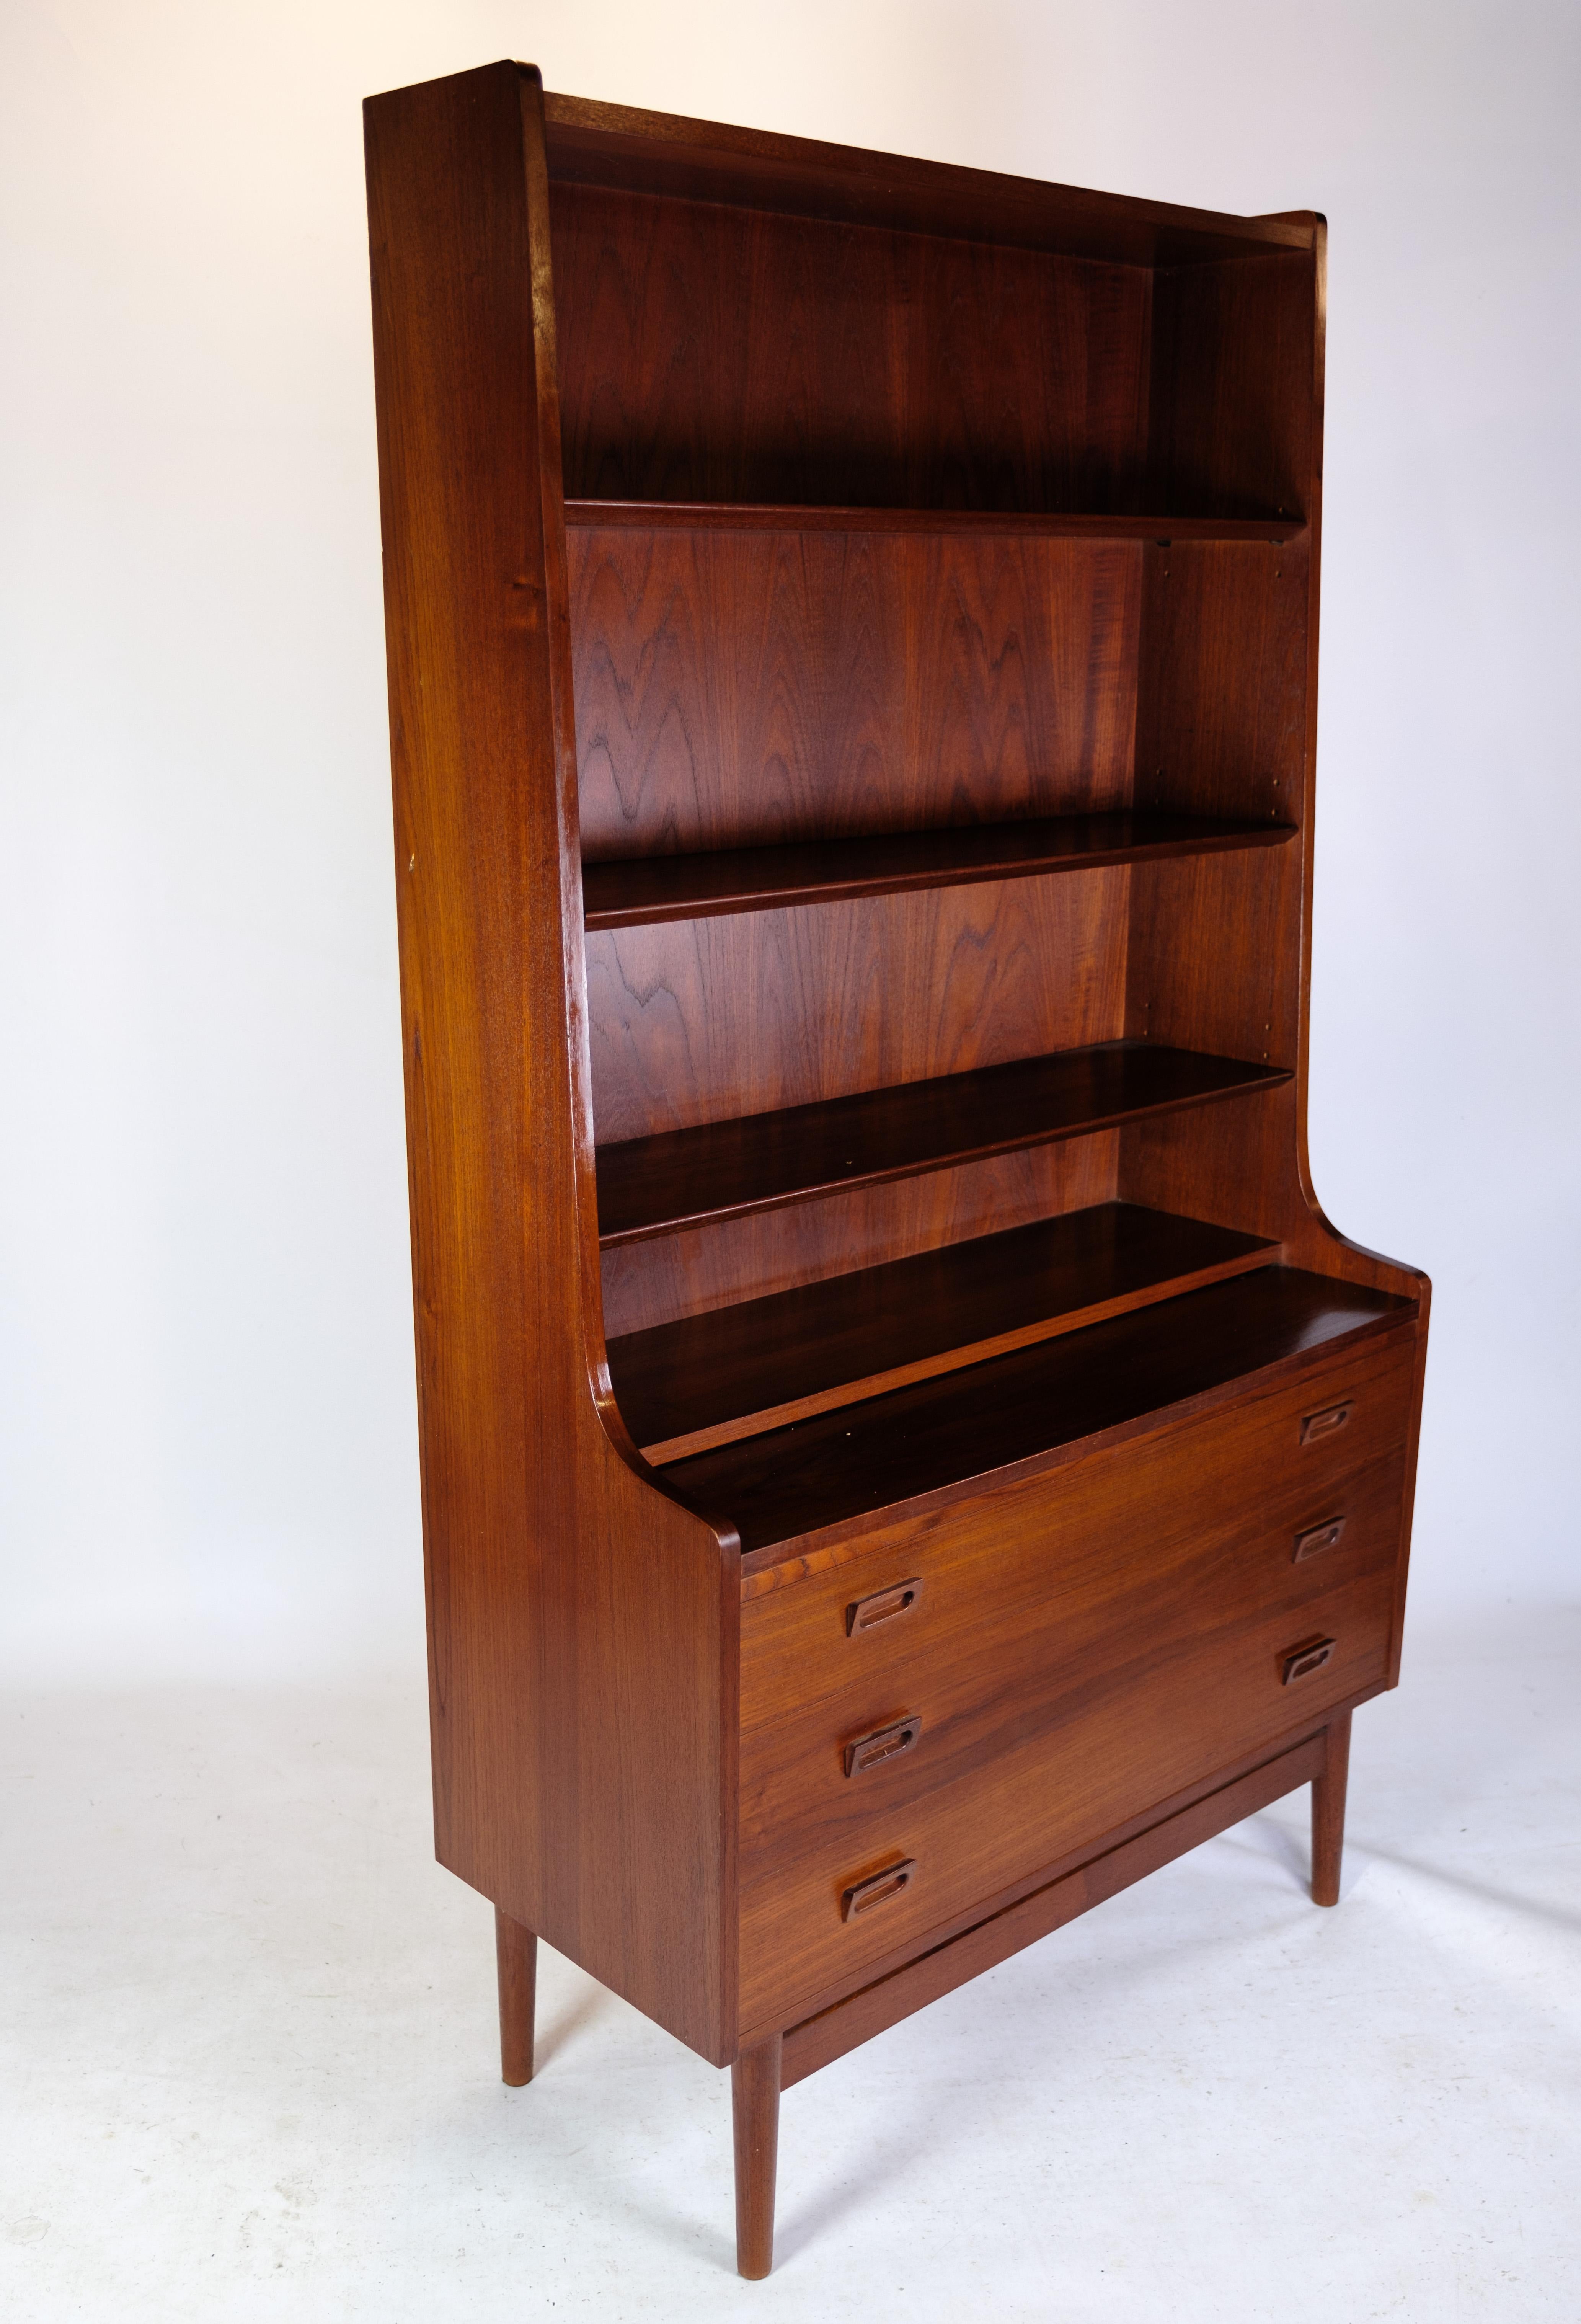 Bookcase In Teak Wood by Johannes Sorth manufactored by Bornholms Møbelfabrik In Good Condition For Sale In Lejre, DK